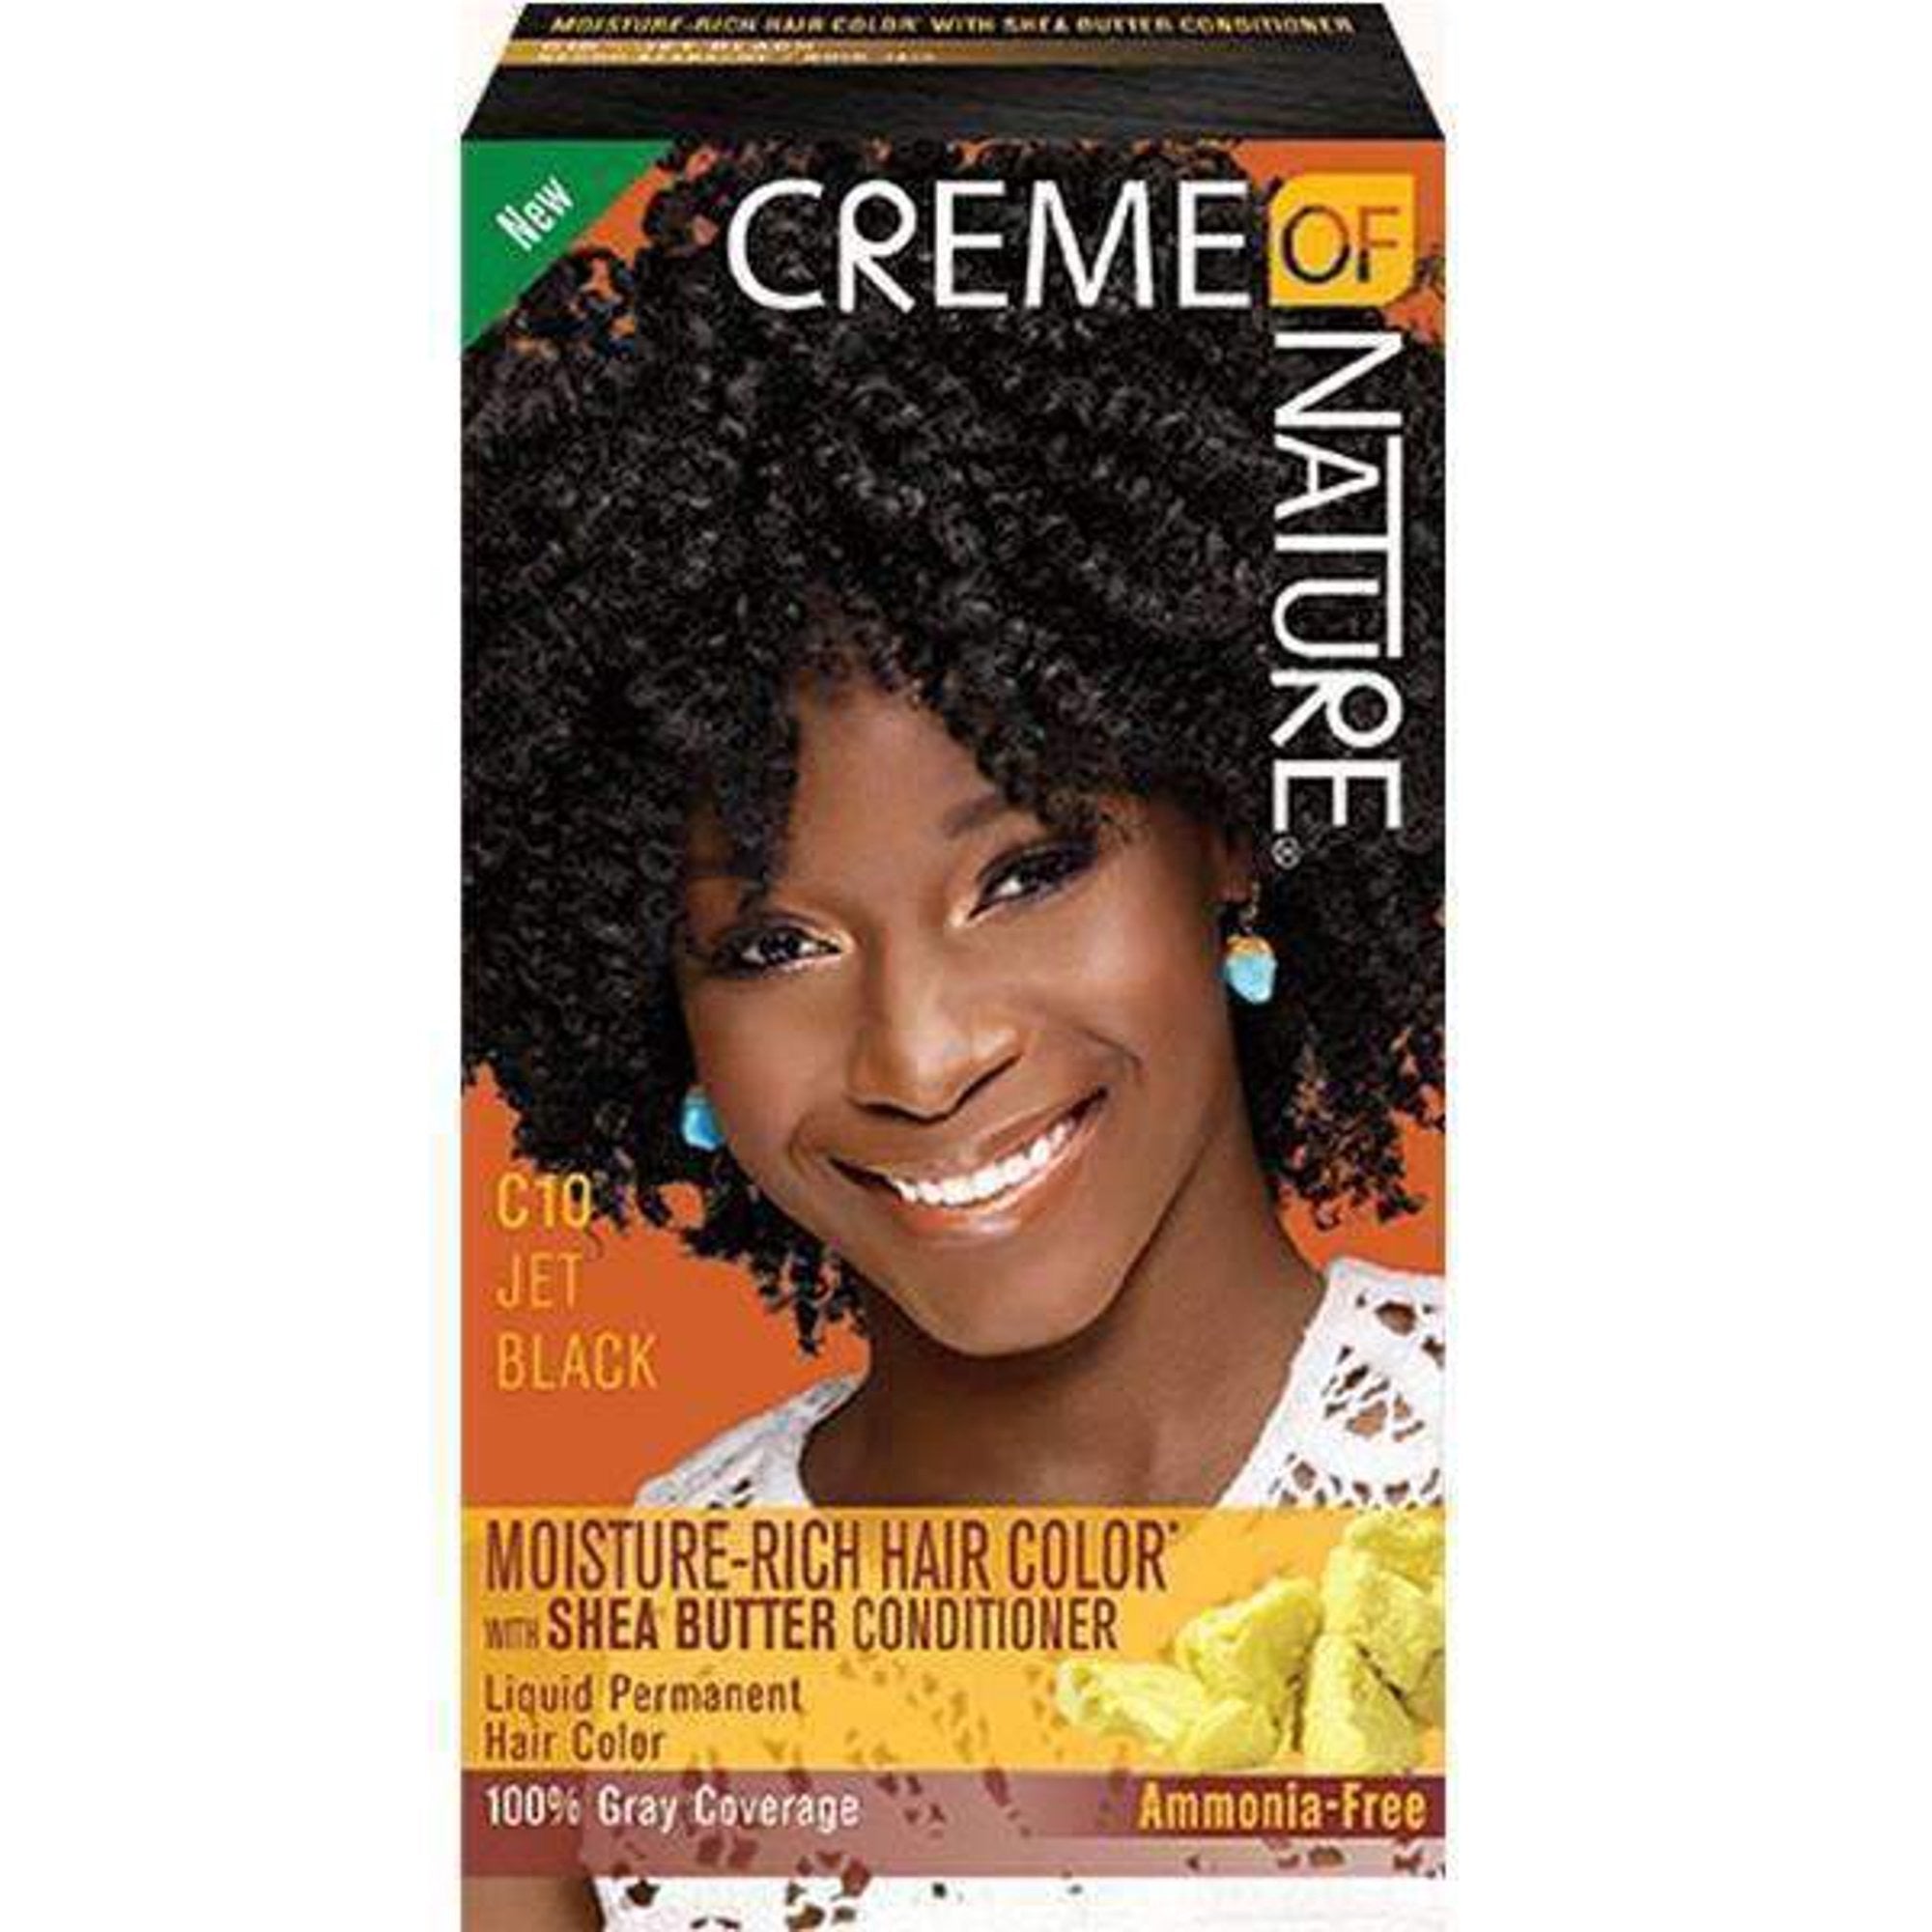 Creme of nature moisture rich hair color with shea butter